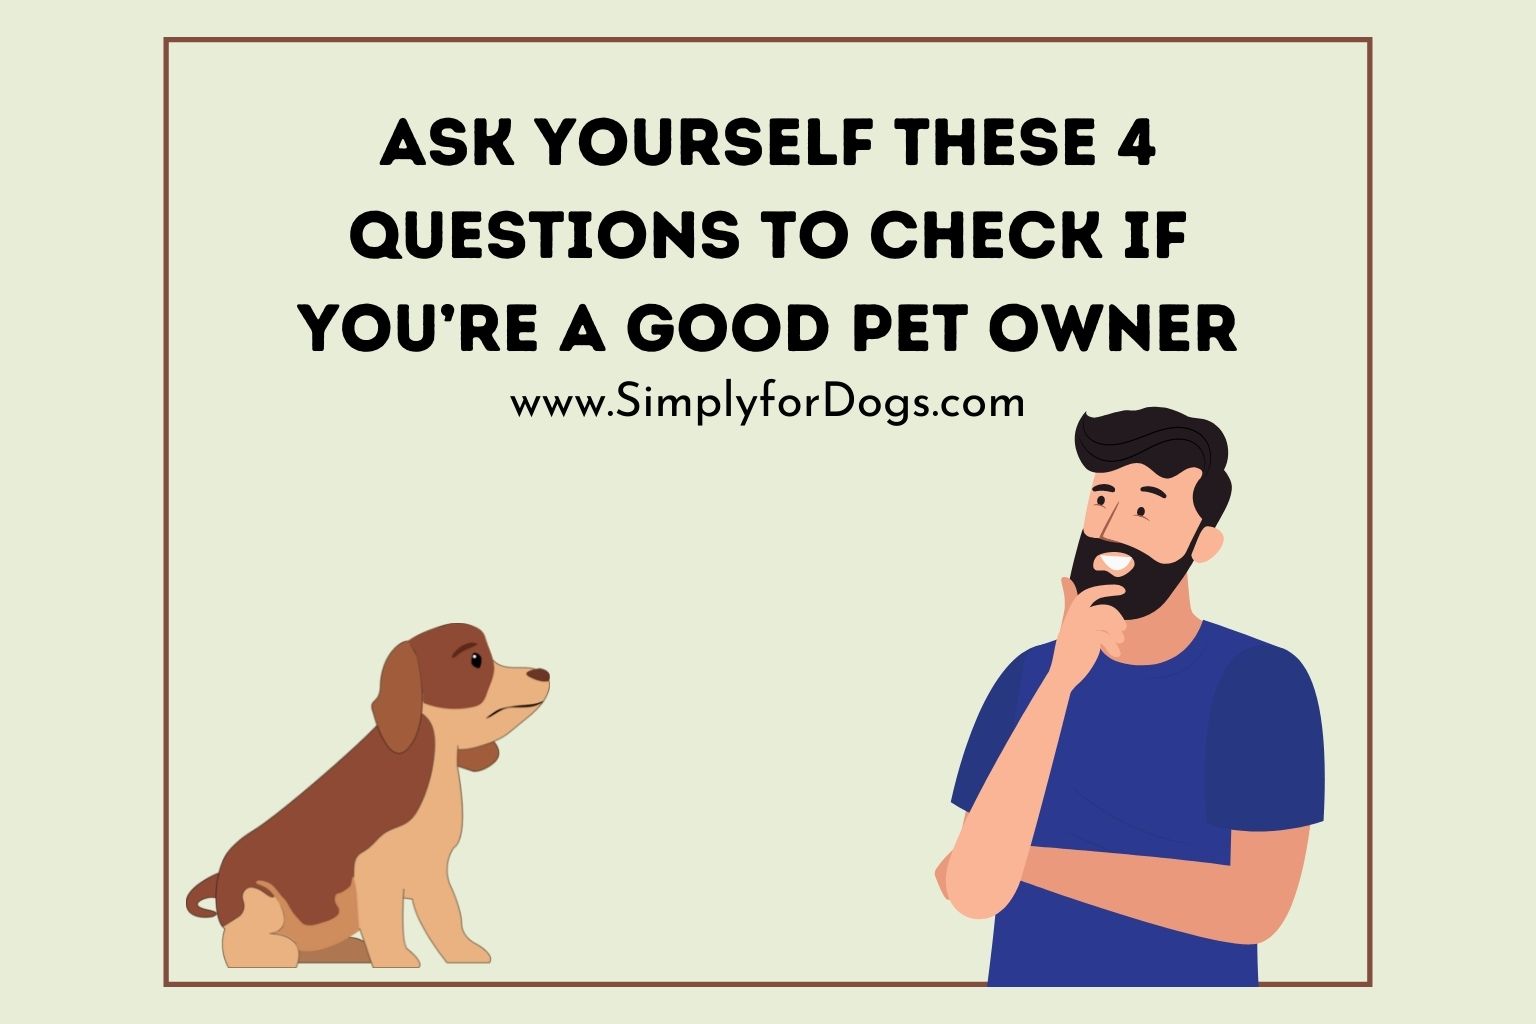 Ask Yourself These 4 Questions to Check if You’re a Good Pet Owner